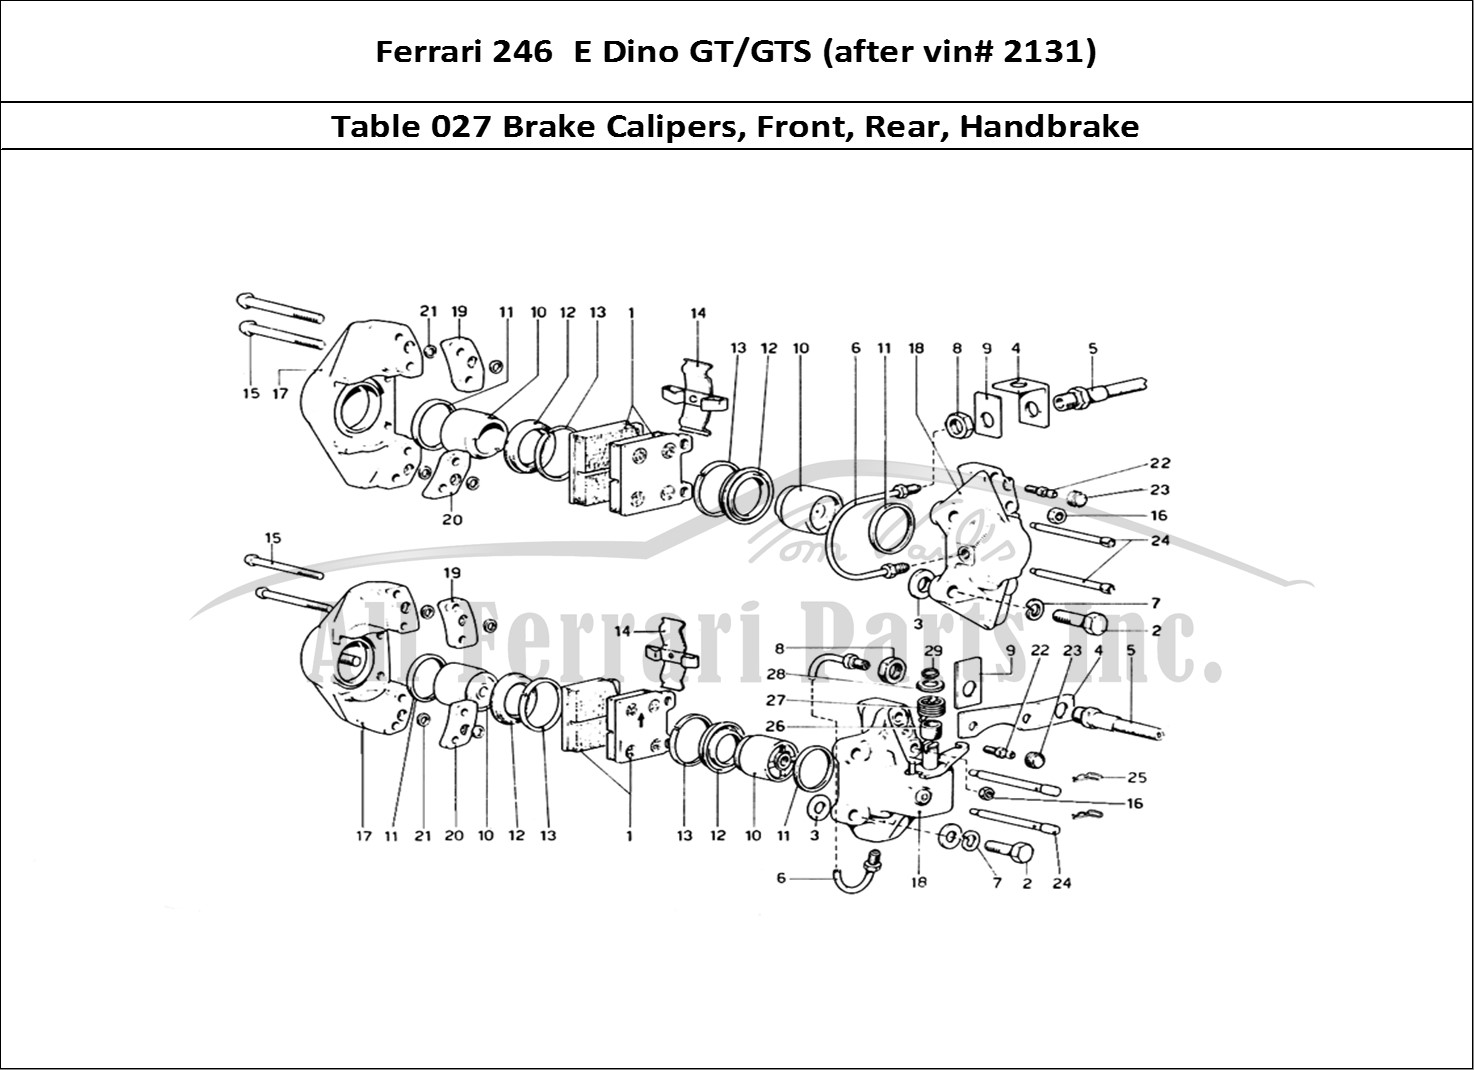 Ferrari Parts Ferrari 246 Dino (1975) Page 027 Calipers for Front and Re